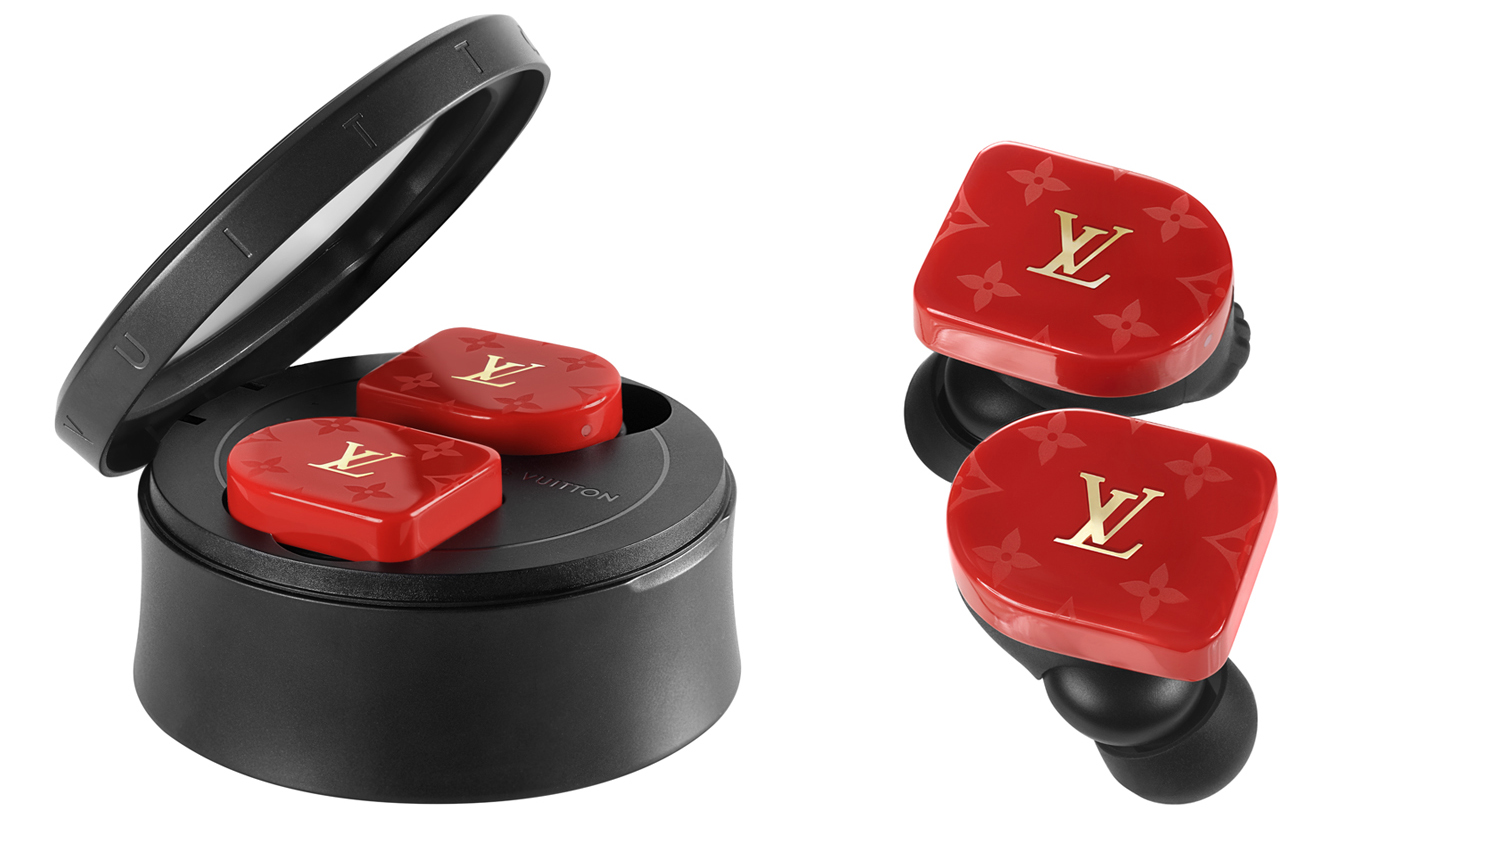 Louis Vuitton Horizon Light Up Earphones Now Available In Malaysia For  RM7,250 